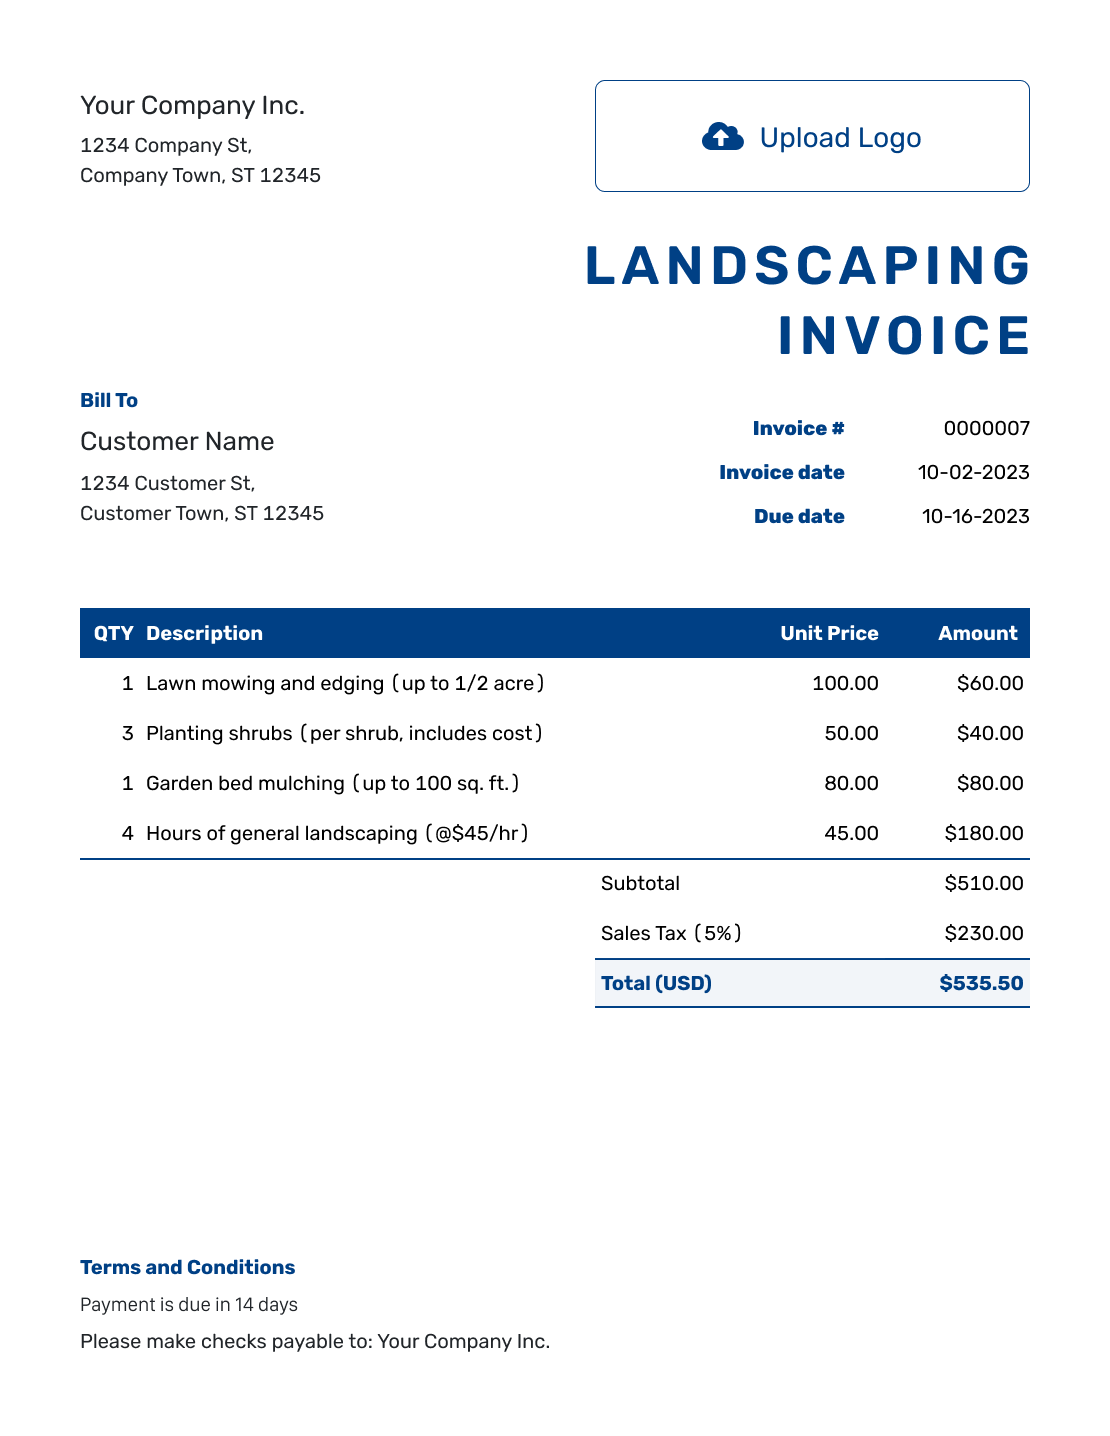 Sample Landscaping Invoice Template